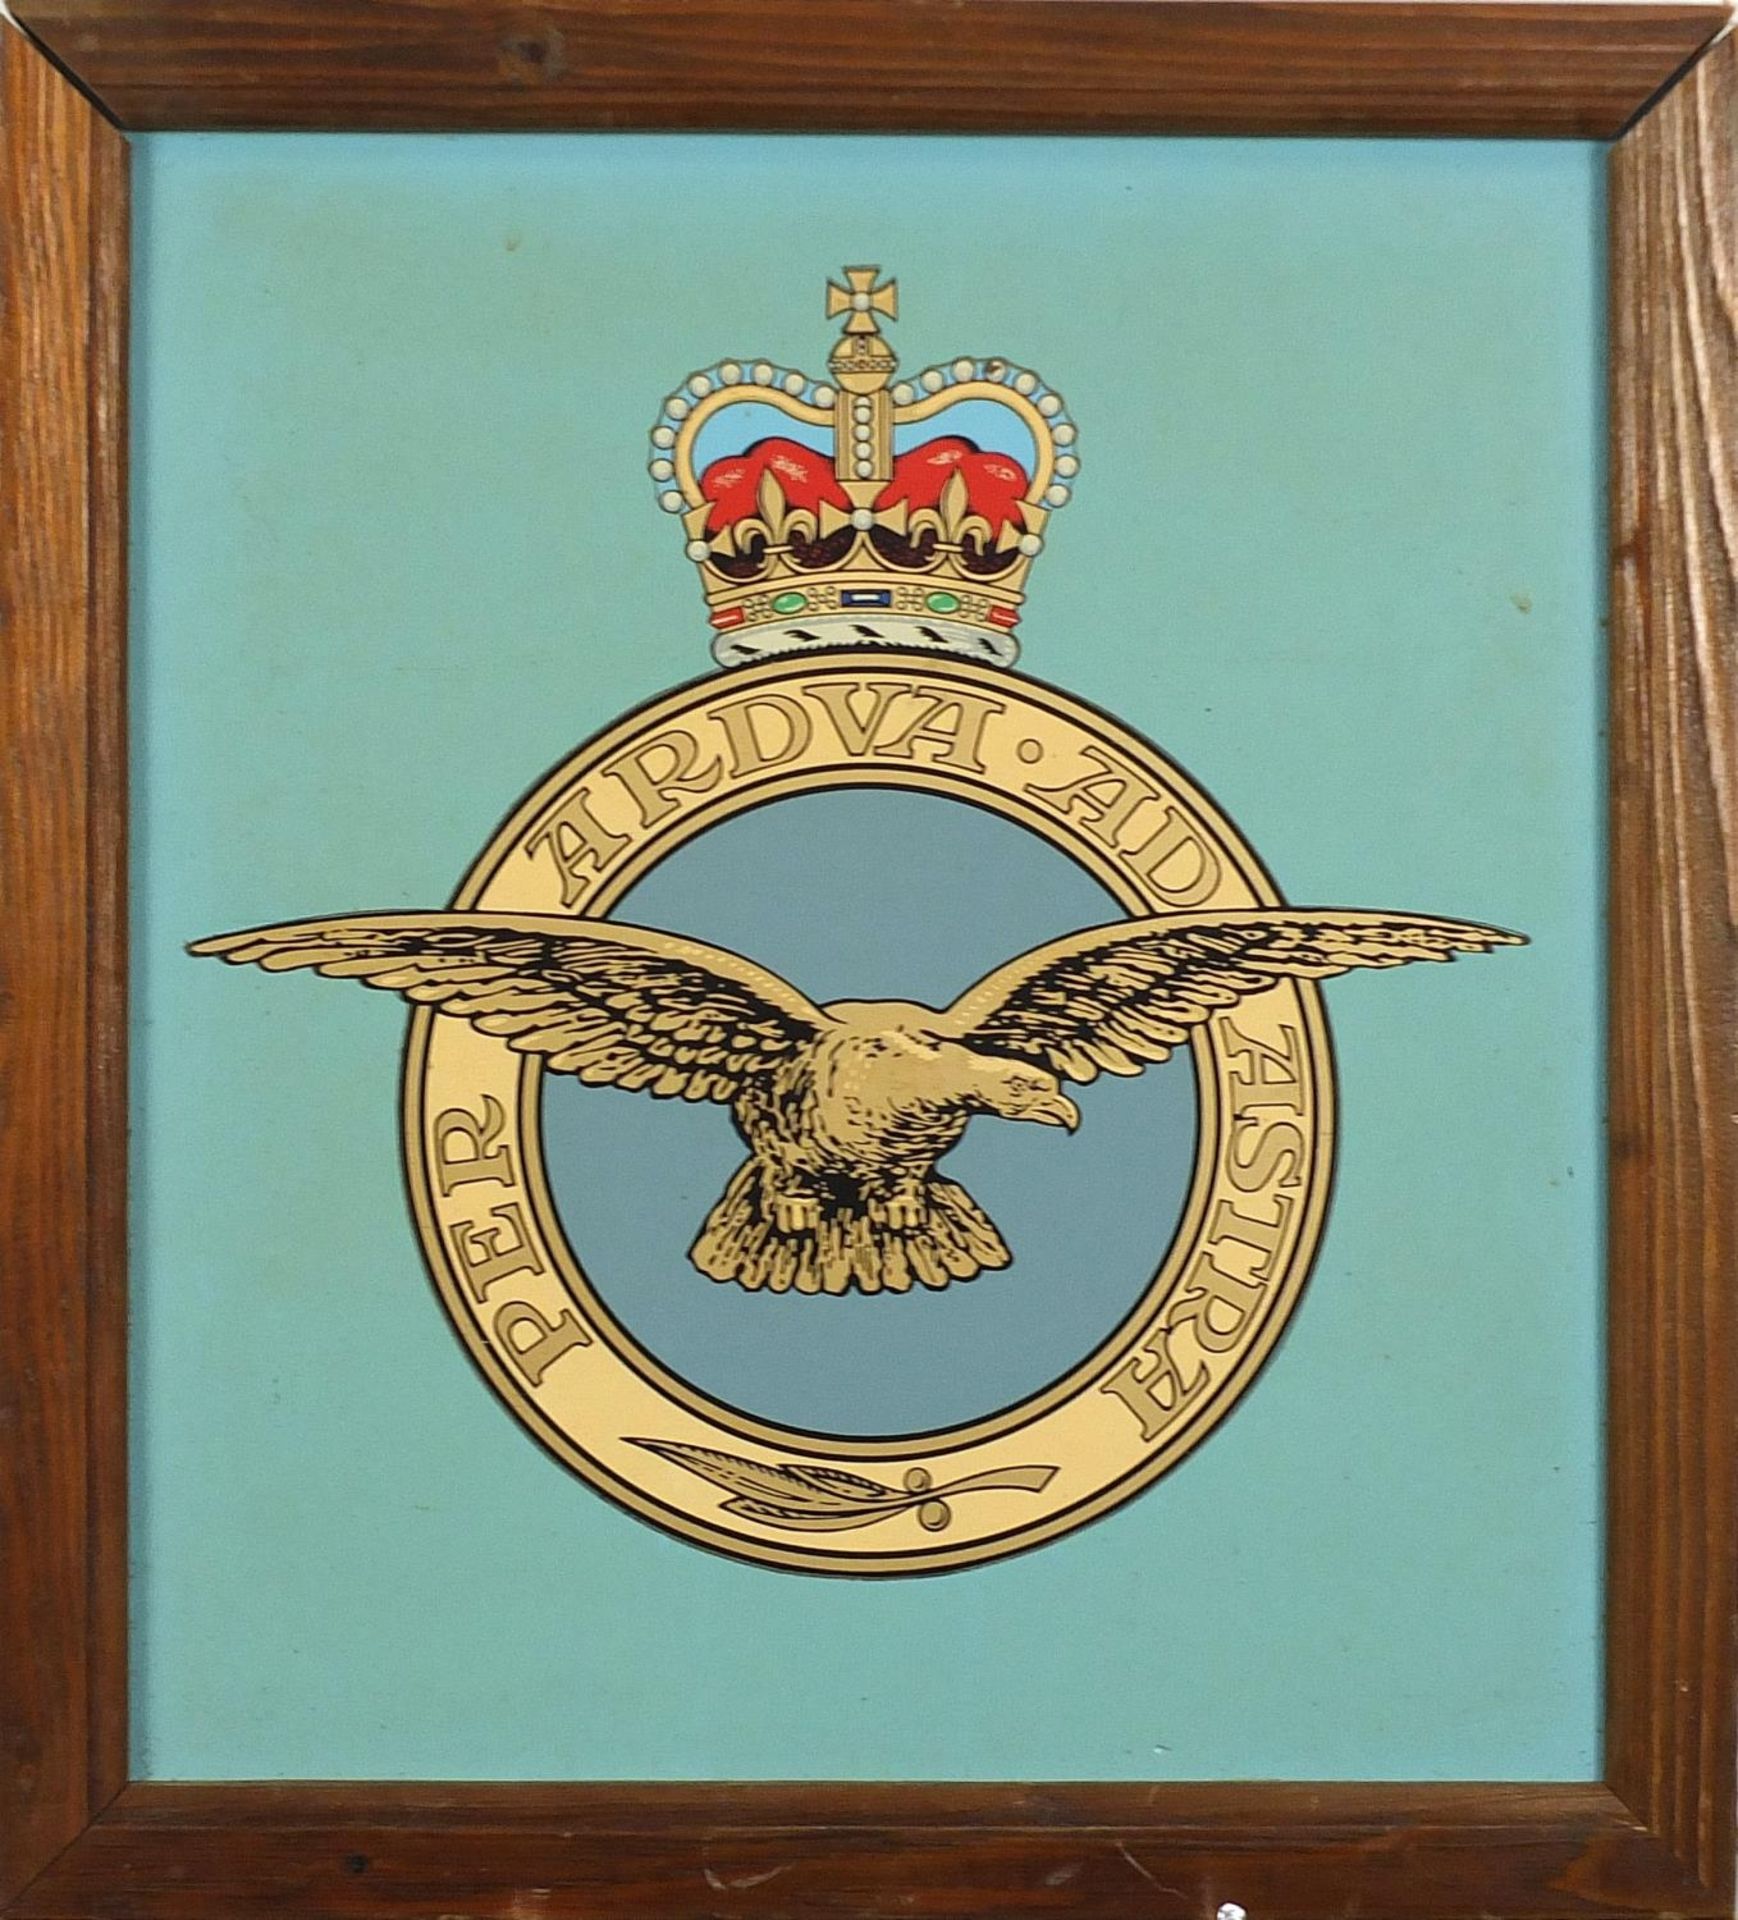 Military interest hand painted RAF panel, framed, 35cm x 31cm excluding the frame - Image 2 of 3